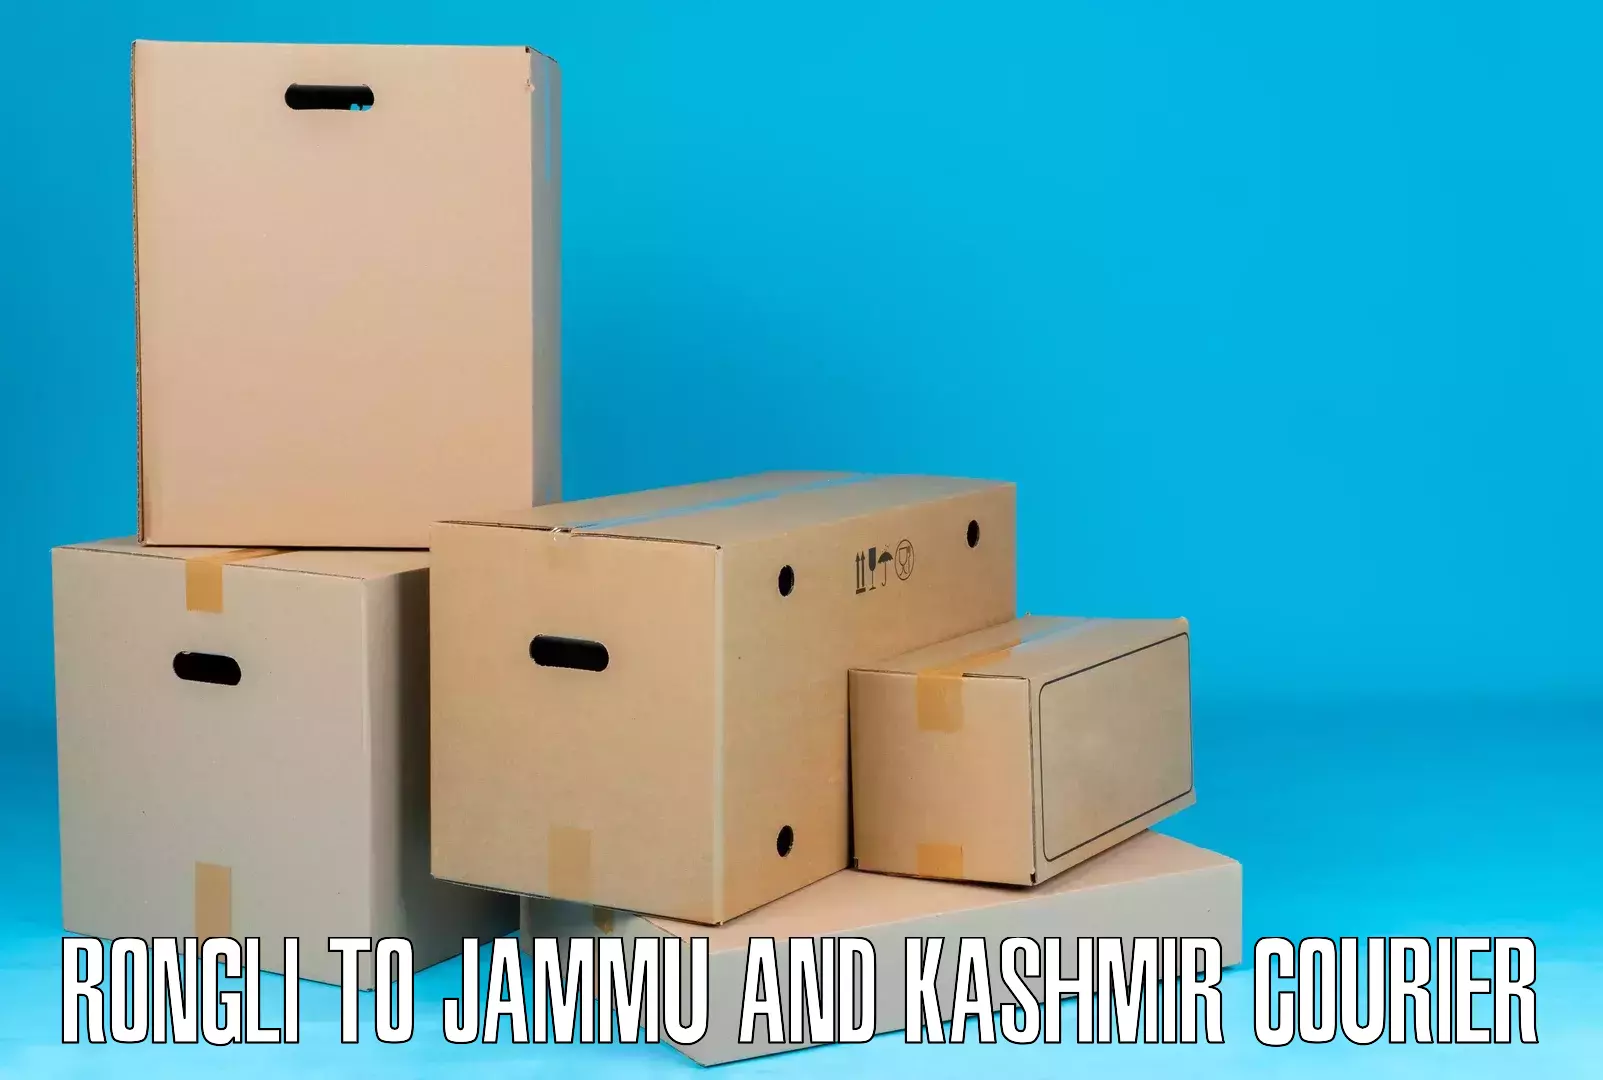 Parcel handling and care Rongli to Jammu and Kashmir